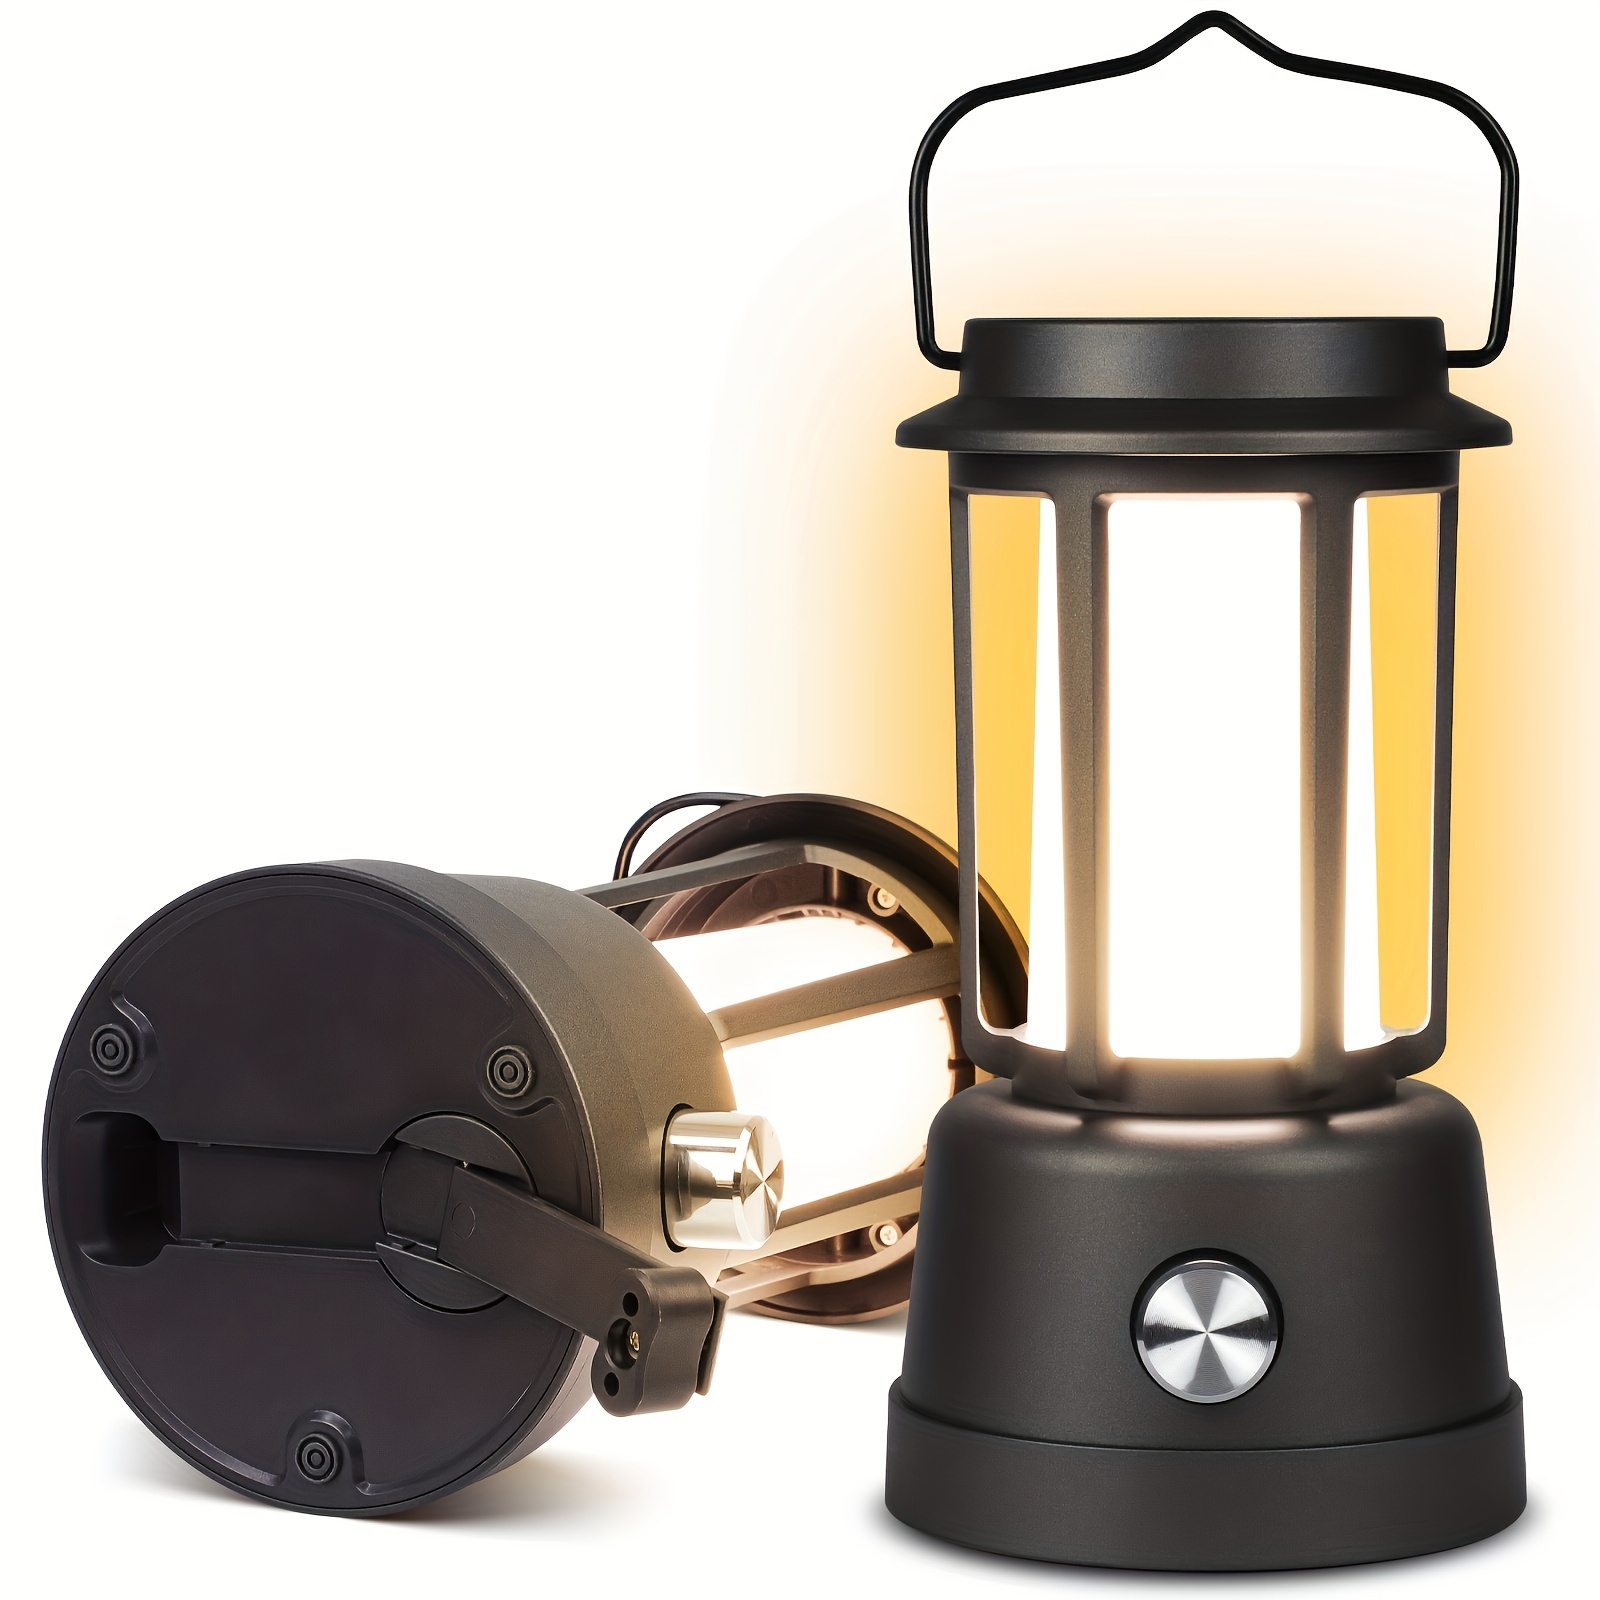 

Camping Lantern, Lanterns For Power Outages 6000mah, Rechargeable Camping Lantern With Hand-cranked, Solar Lantern Camping Essentials For/tent/hiking